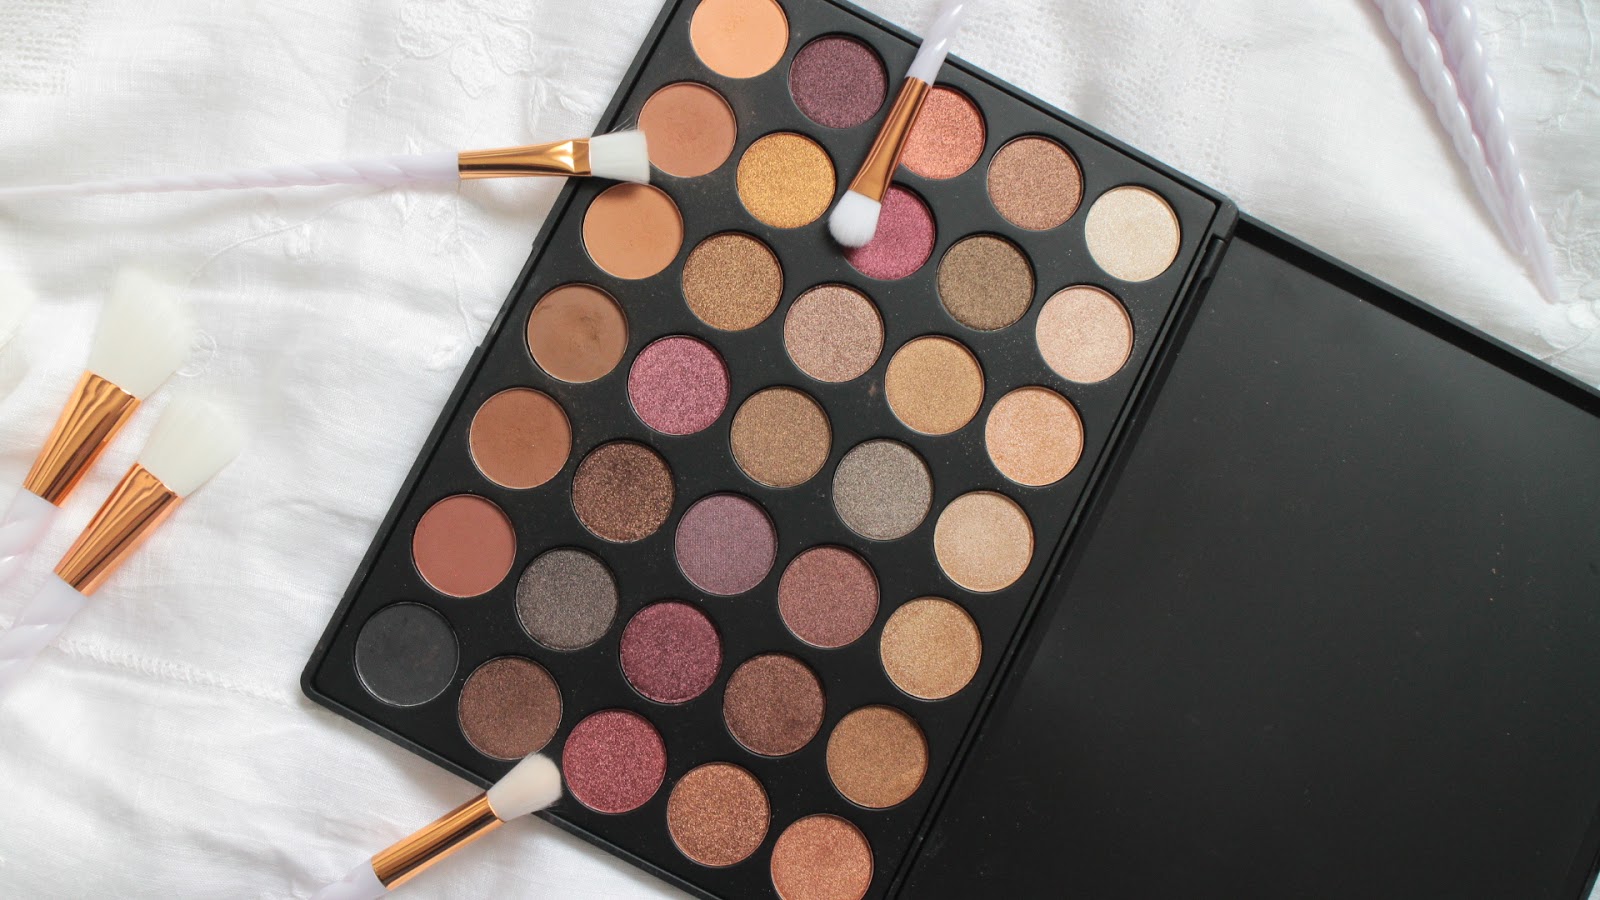 Morphe 35f is very much what I would say an autumnal palette with red and b...